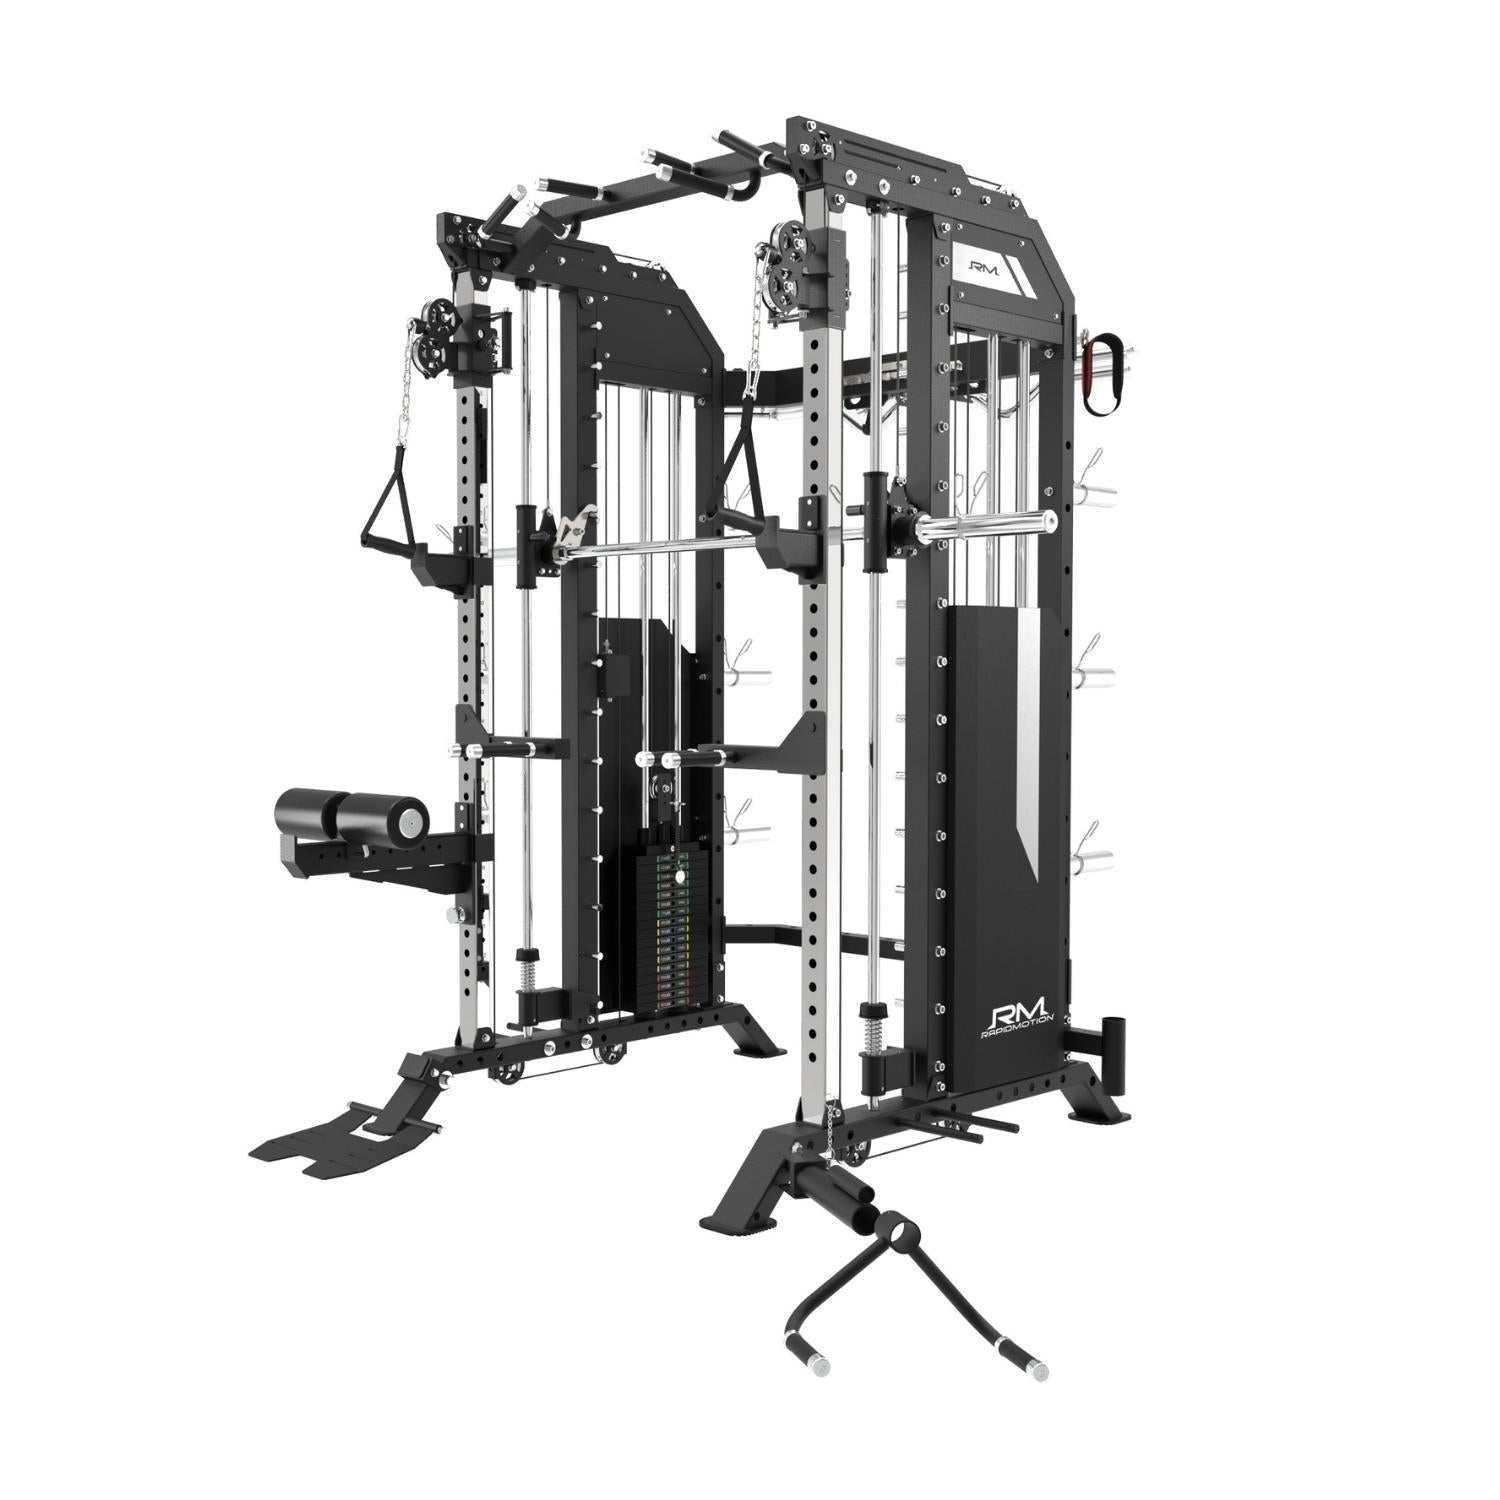 Rapid Motion Power Grip Cable Attachments - Lat Pulldown and Row